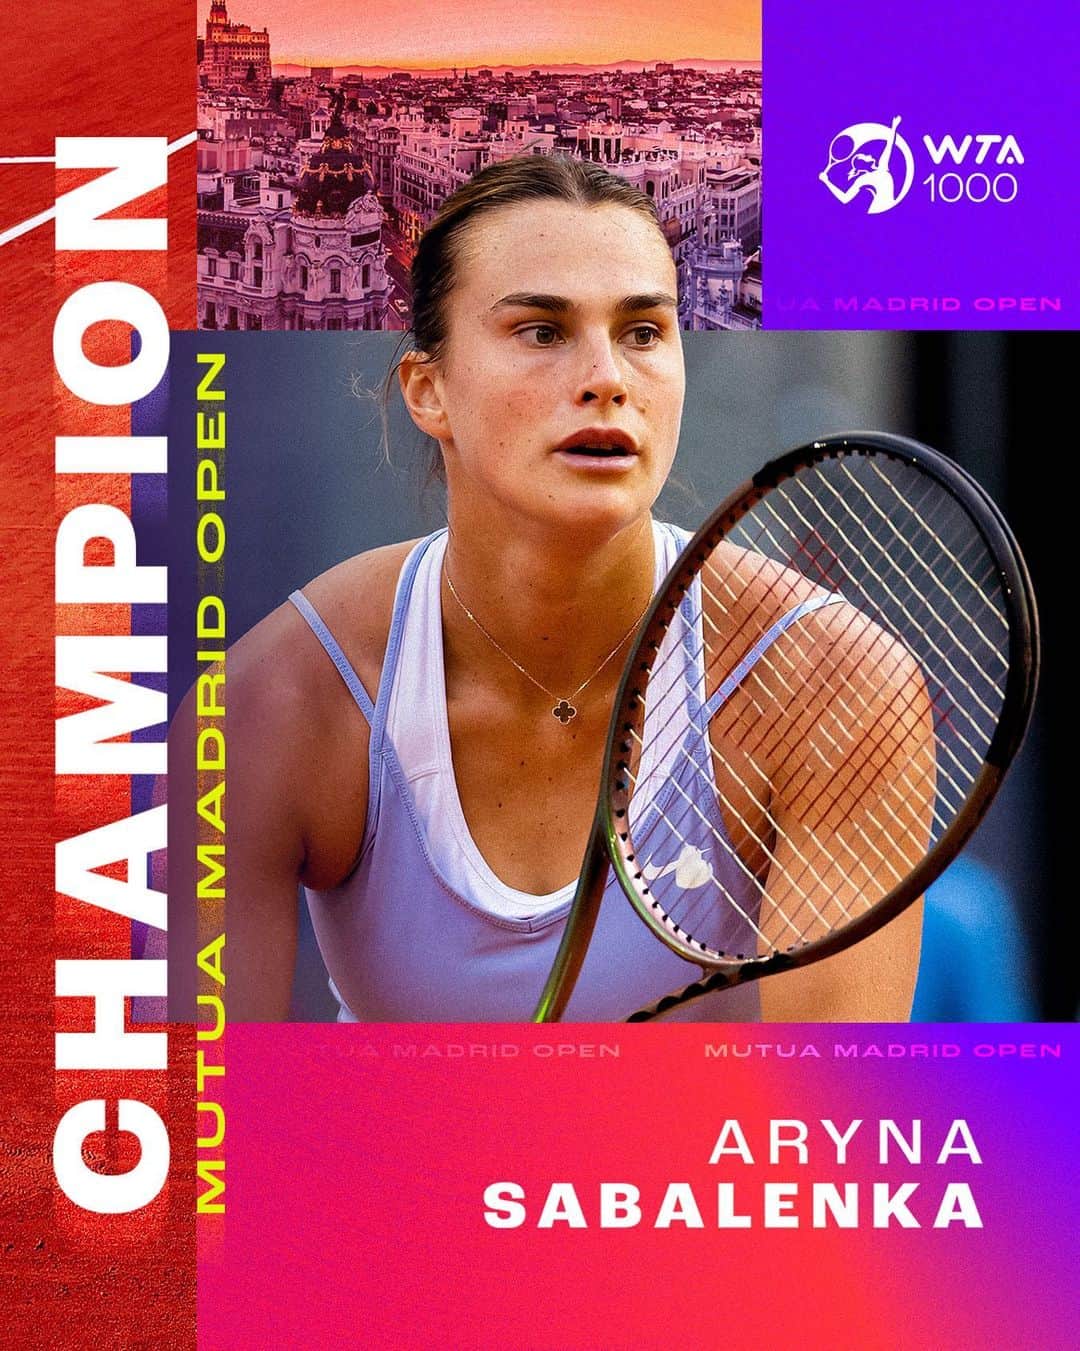 WTA（女子テニス協会）のインスタグラム：「Two-time @mutuamadridopen champ 🏆  @sabalenka_aryna secures the title over Swiatek, 6-3, 3-6, 6-3!」